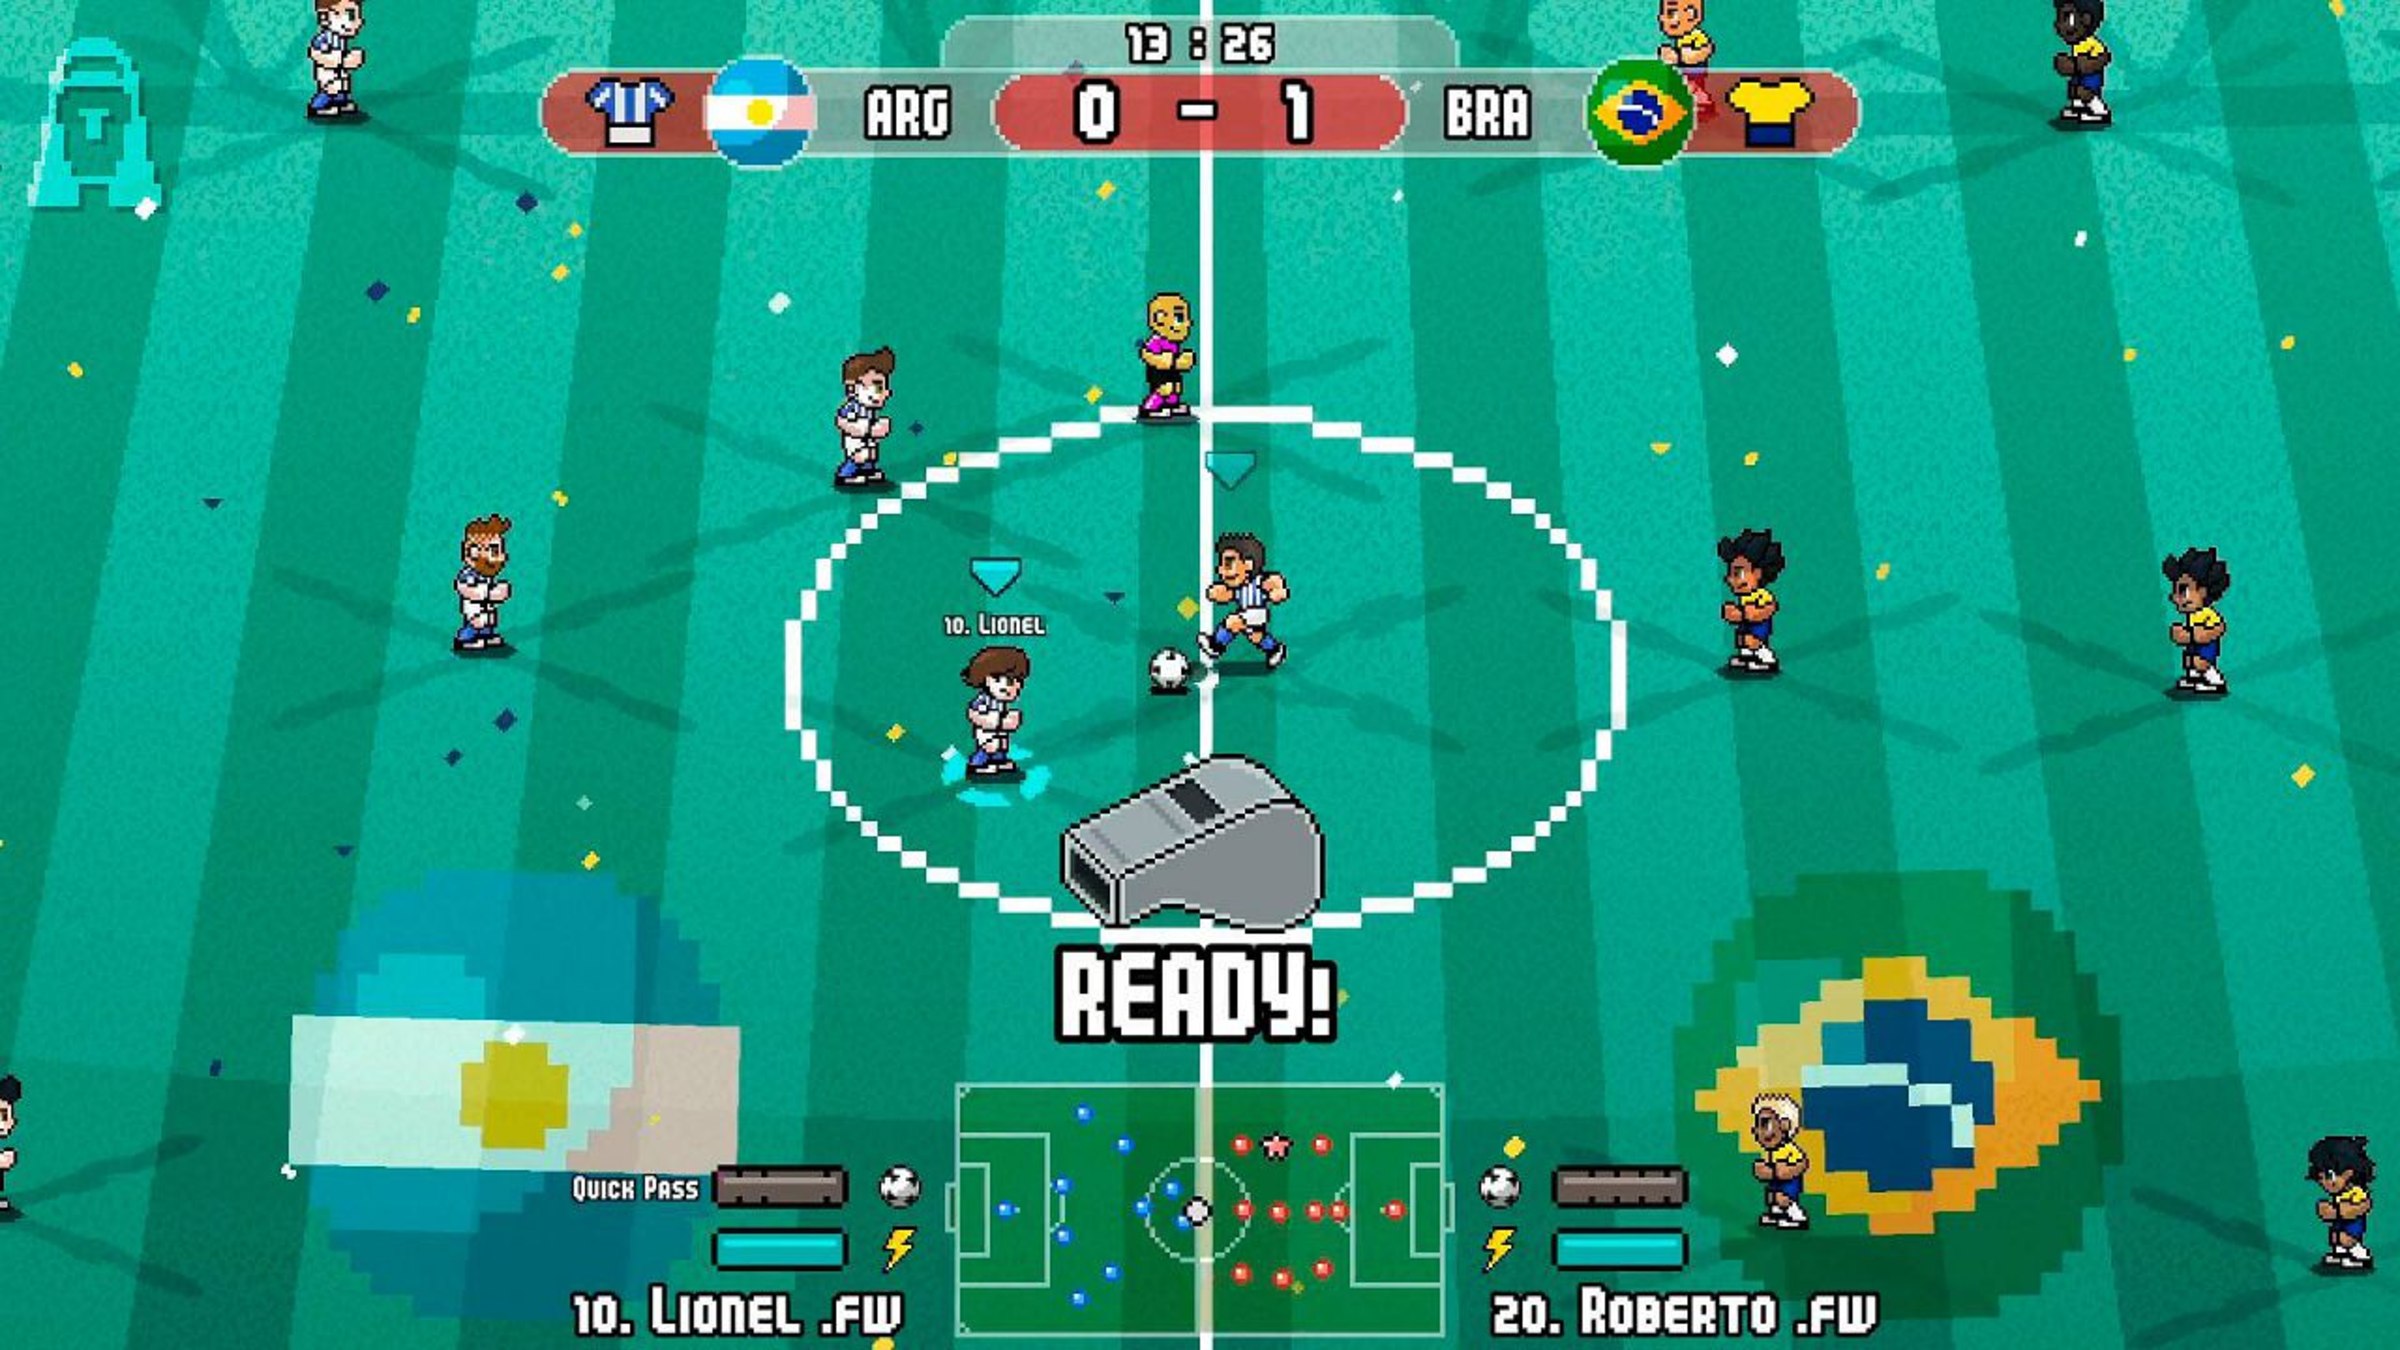 https://assets.nintendo.com/image/upload/c_fill,w_1200/q_auto:best/f_auto/dpr_2.0/ncom/en_US/games/switch/p/pixel-cup-soccer-ultimate-edition-switch/